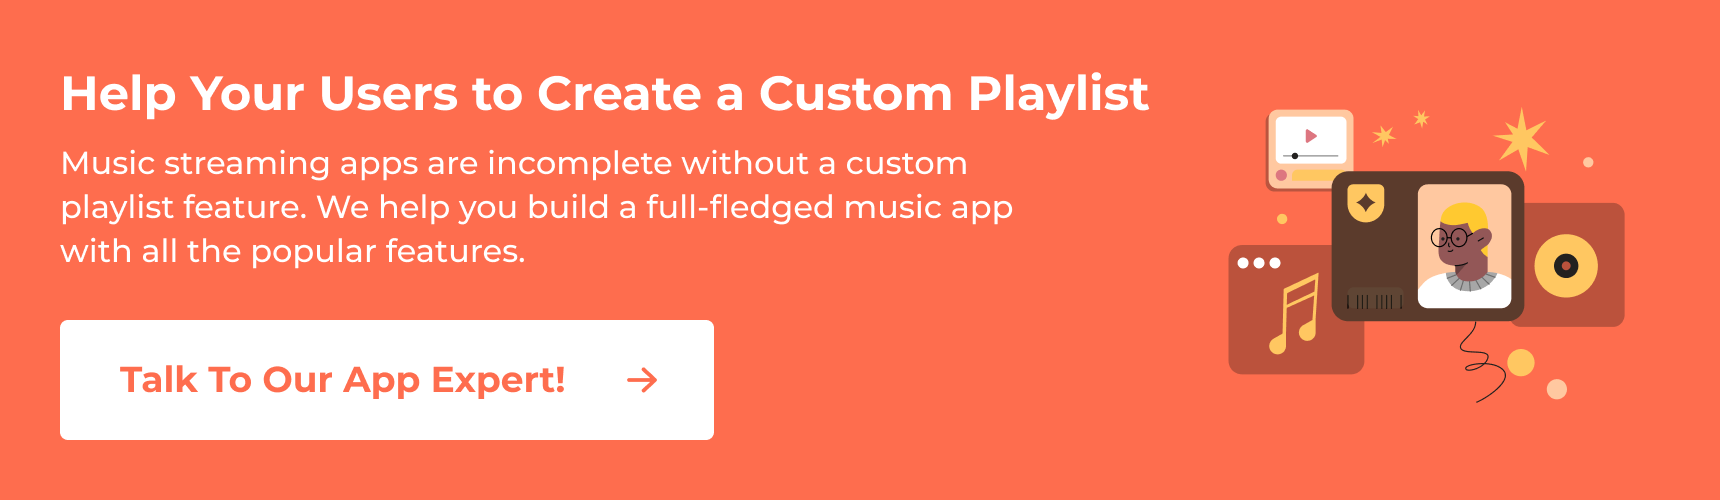 Build an audio streaming app with a custom playlist | How to develop an audio streaming app or music app with a playlist feature